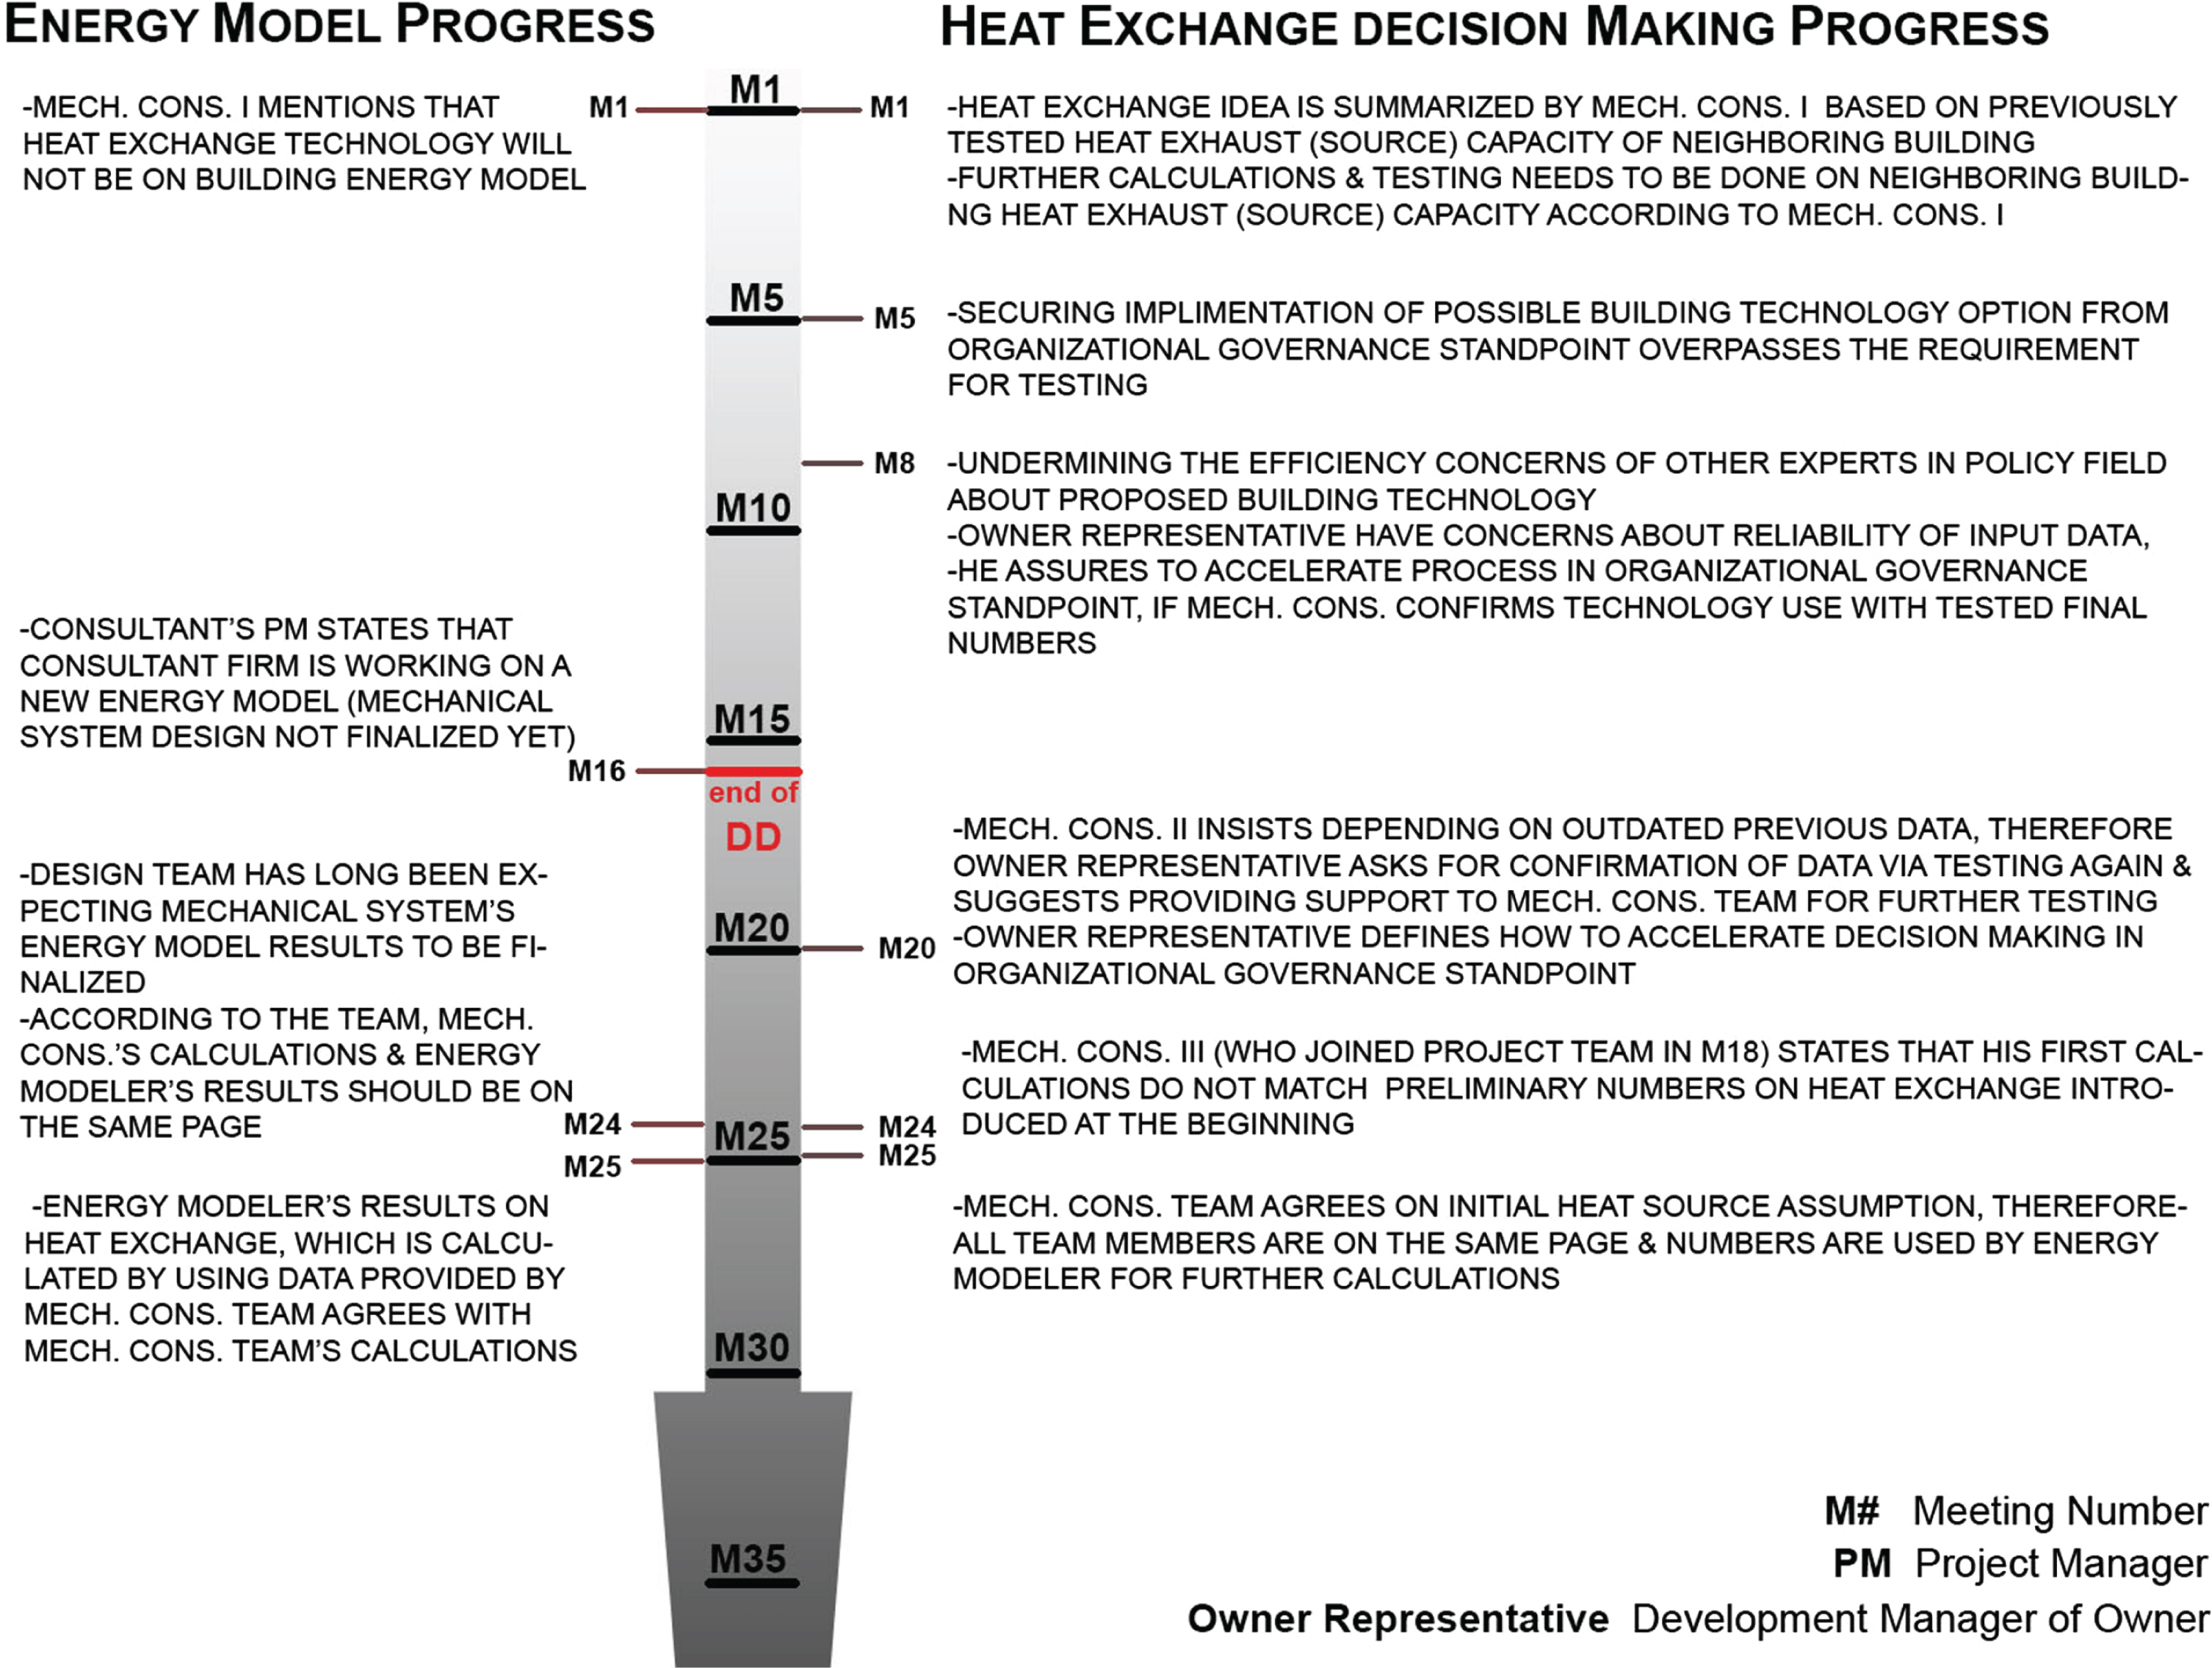 Graphical Representation of Project’s Heat Exchange Decision Making Process.